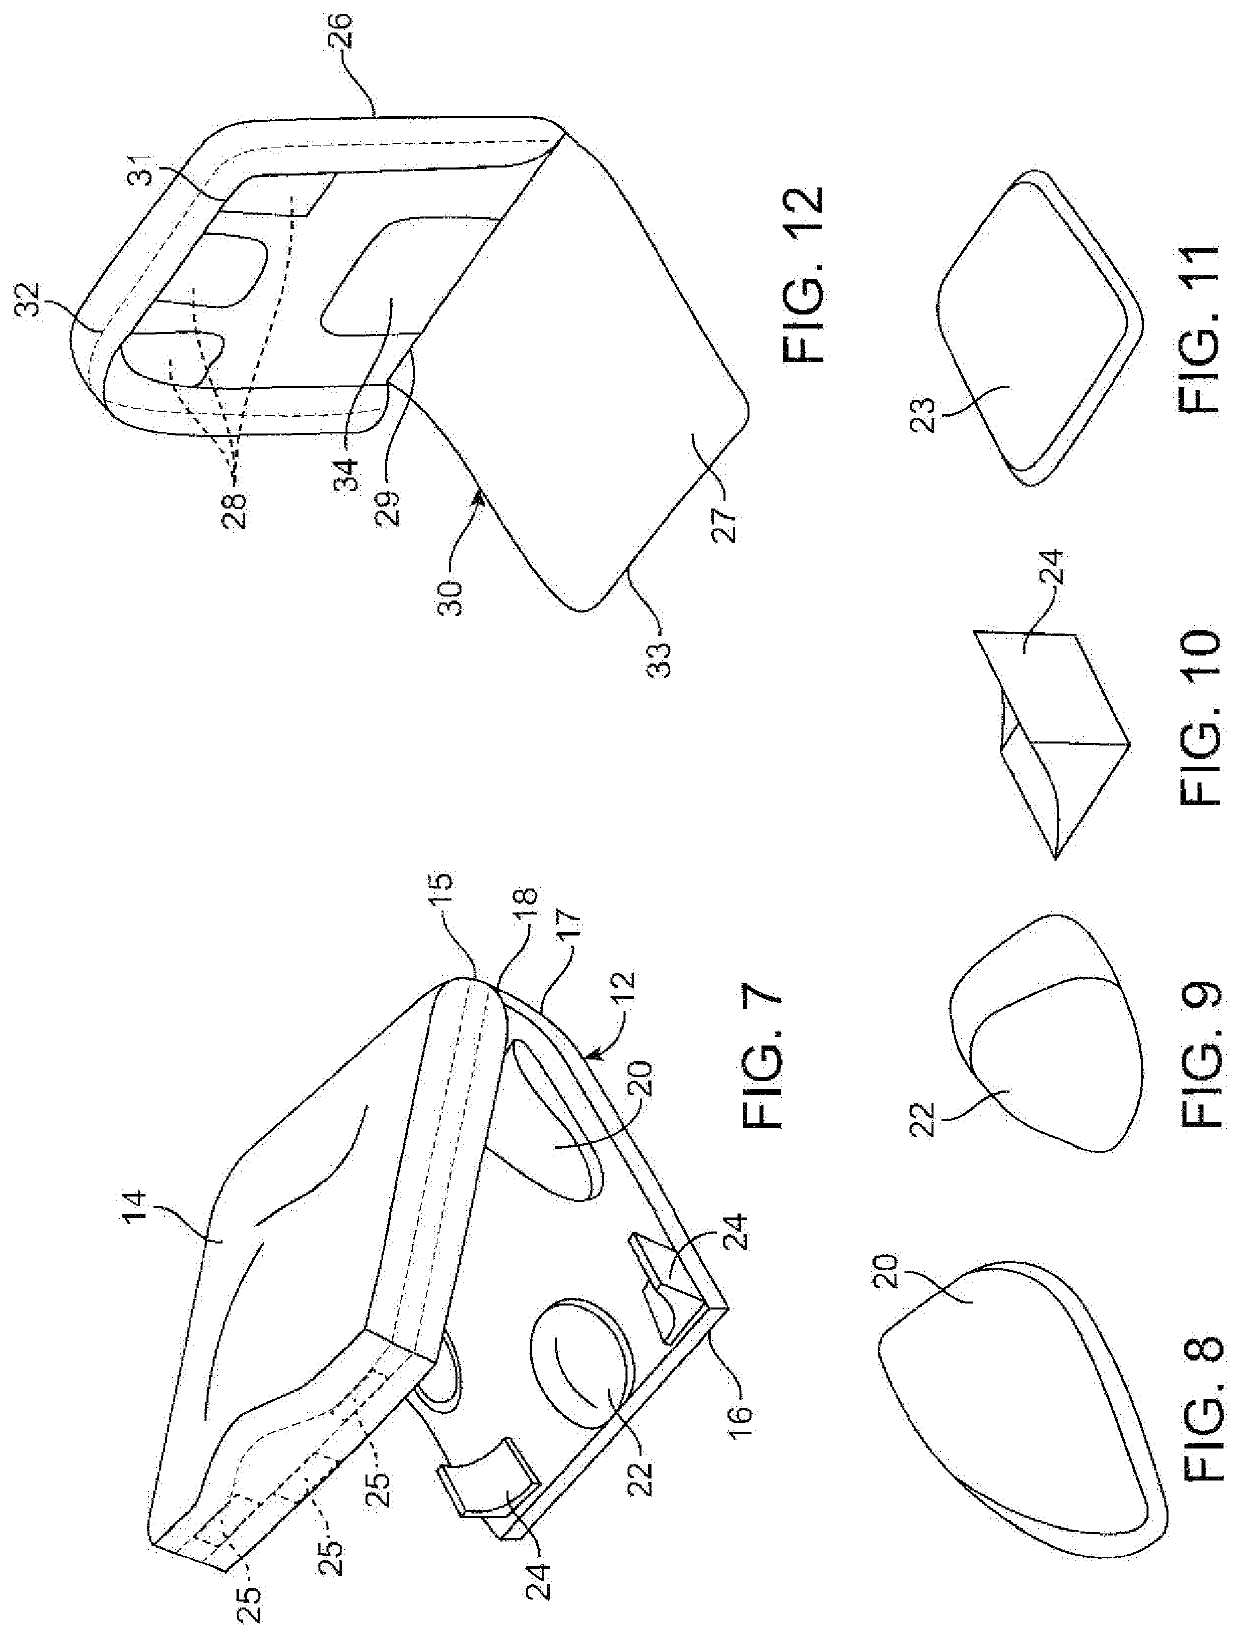 Adjustable anatomical support and seat cushion apparatus for wheelchairs